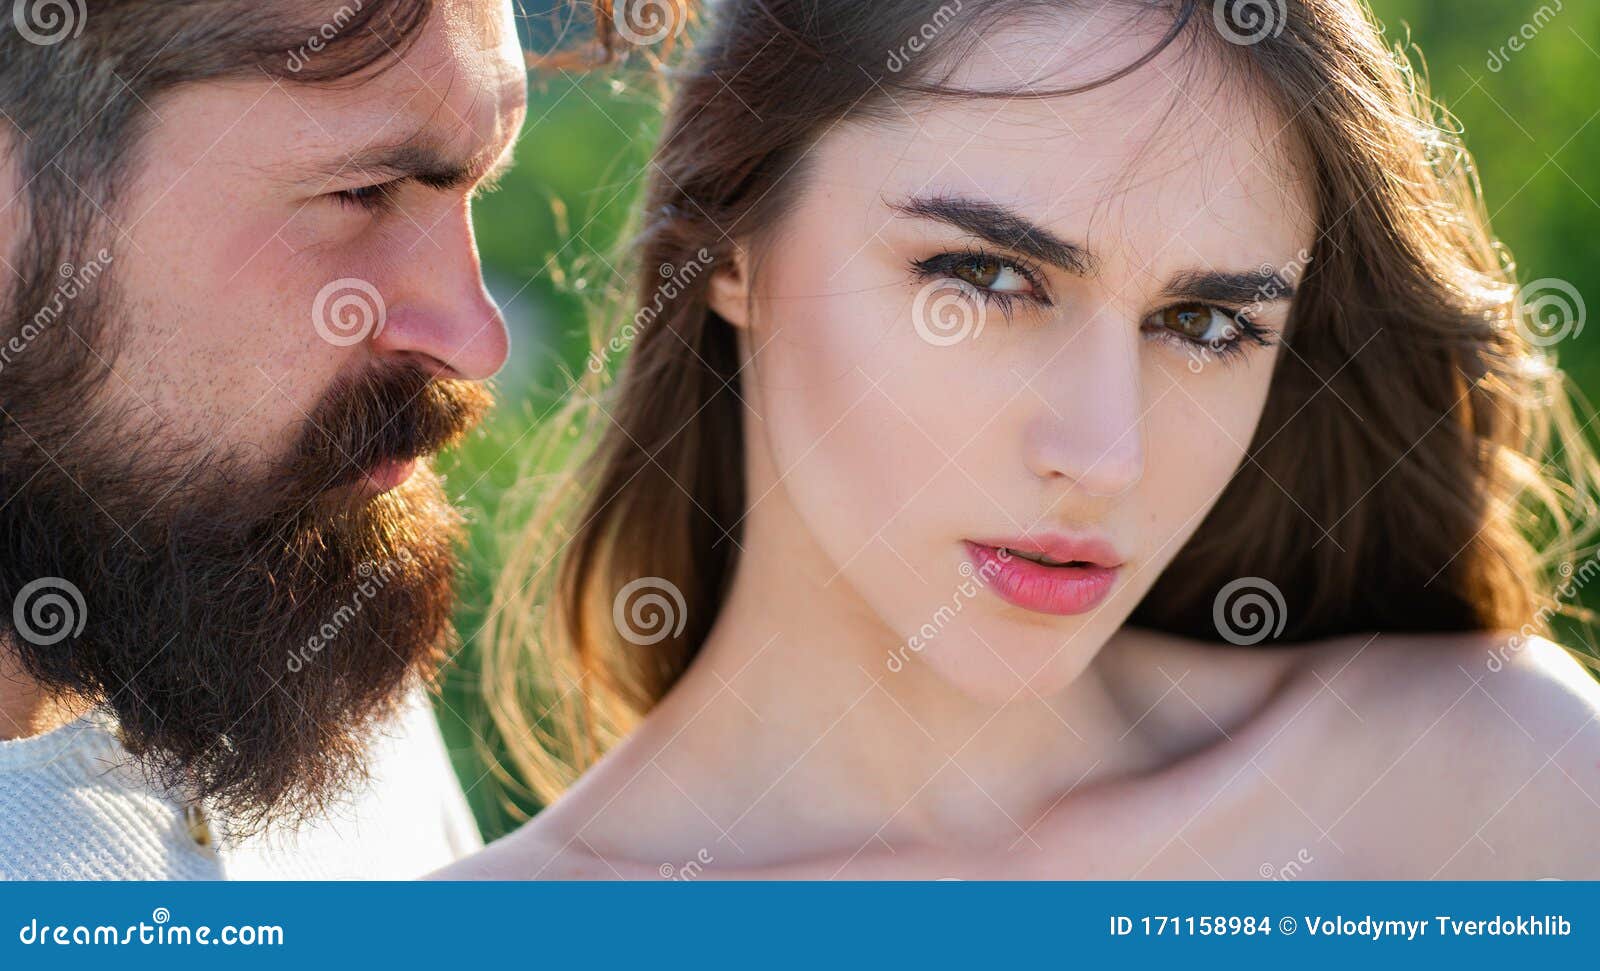 Young Tender Lover Enjoys Touching Soft Skin of Sensual Lady